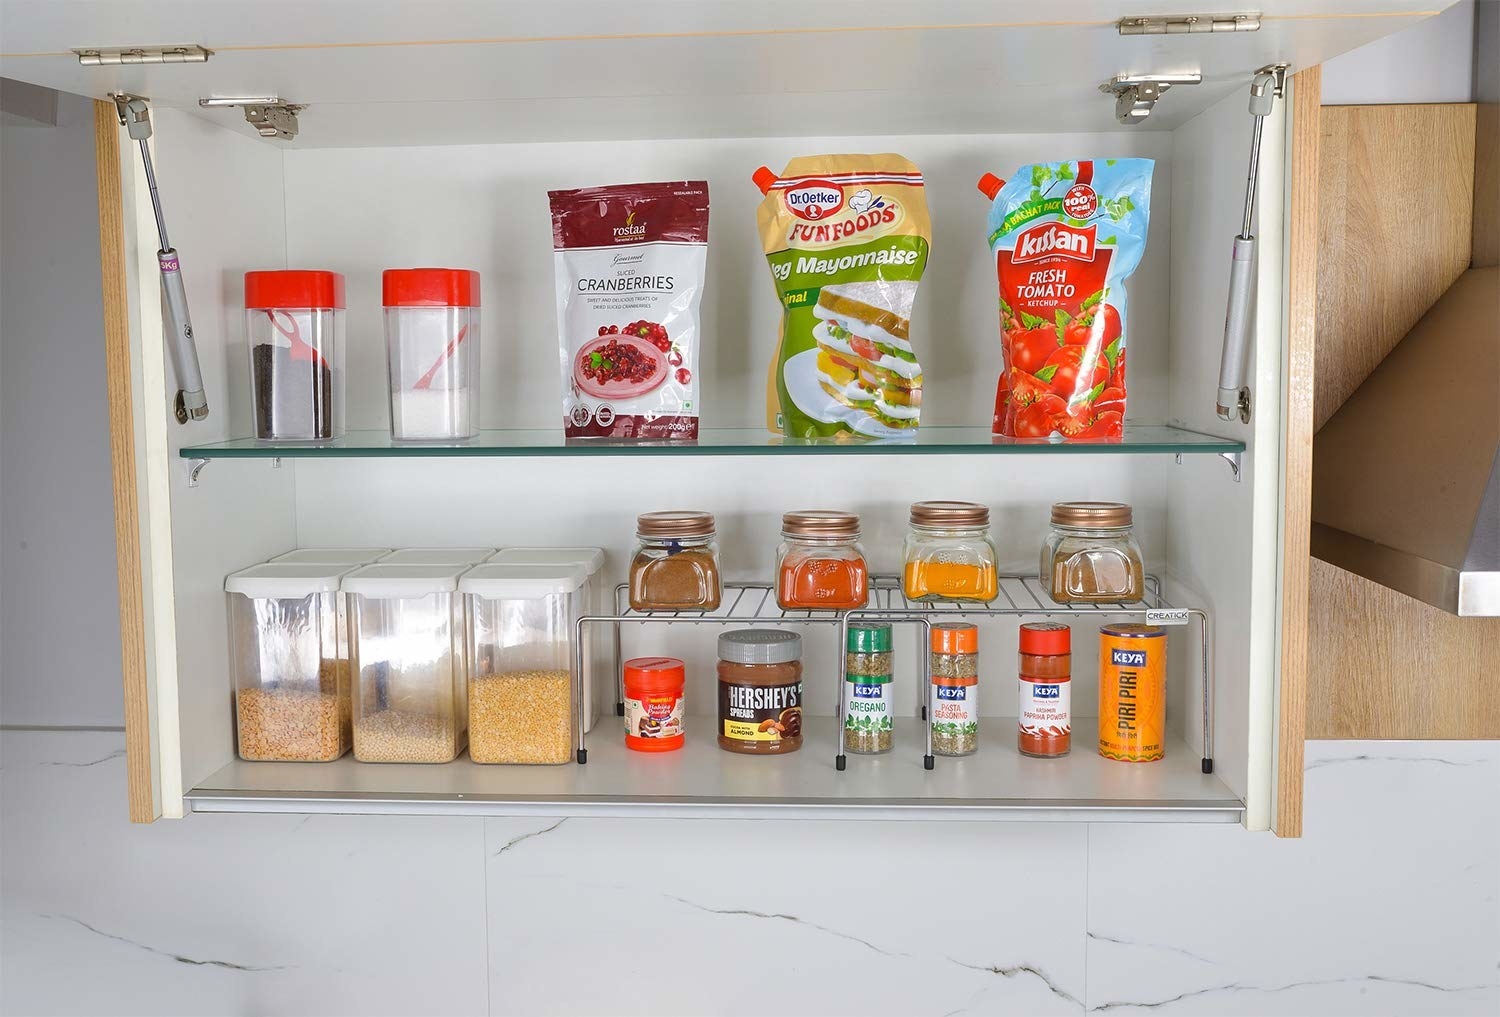 The organiser placed inside a kitchen cupboard with sauces and jars of spices on it